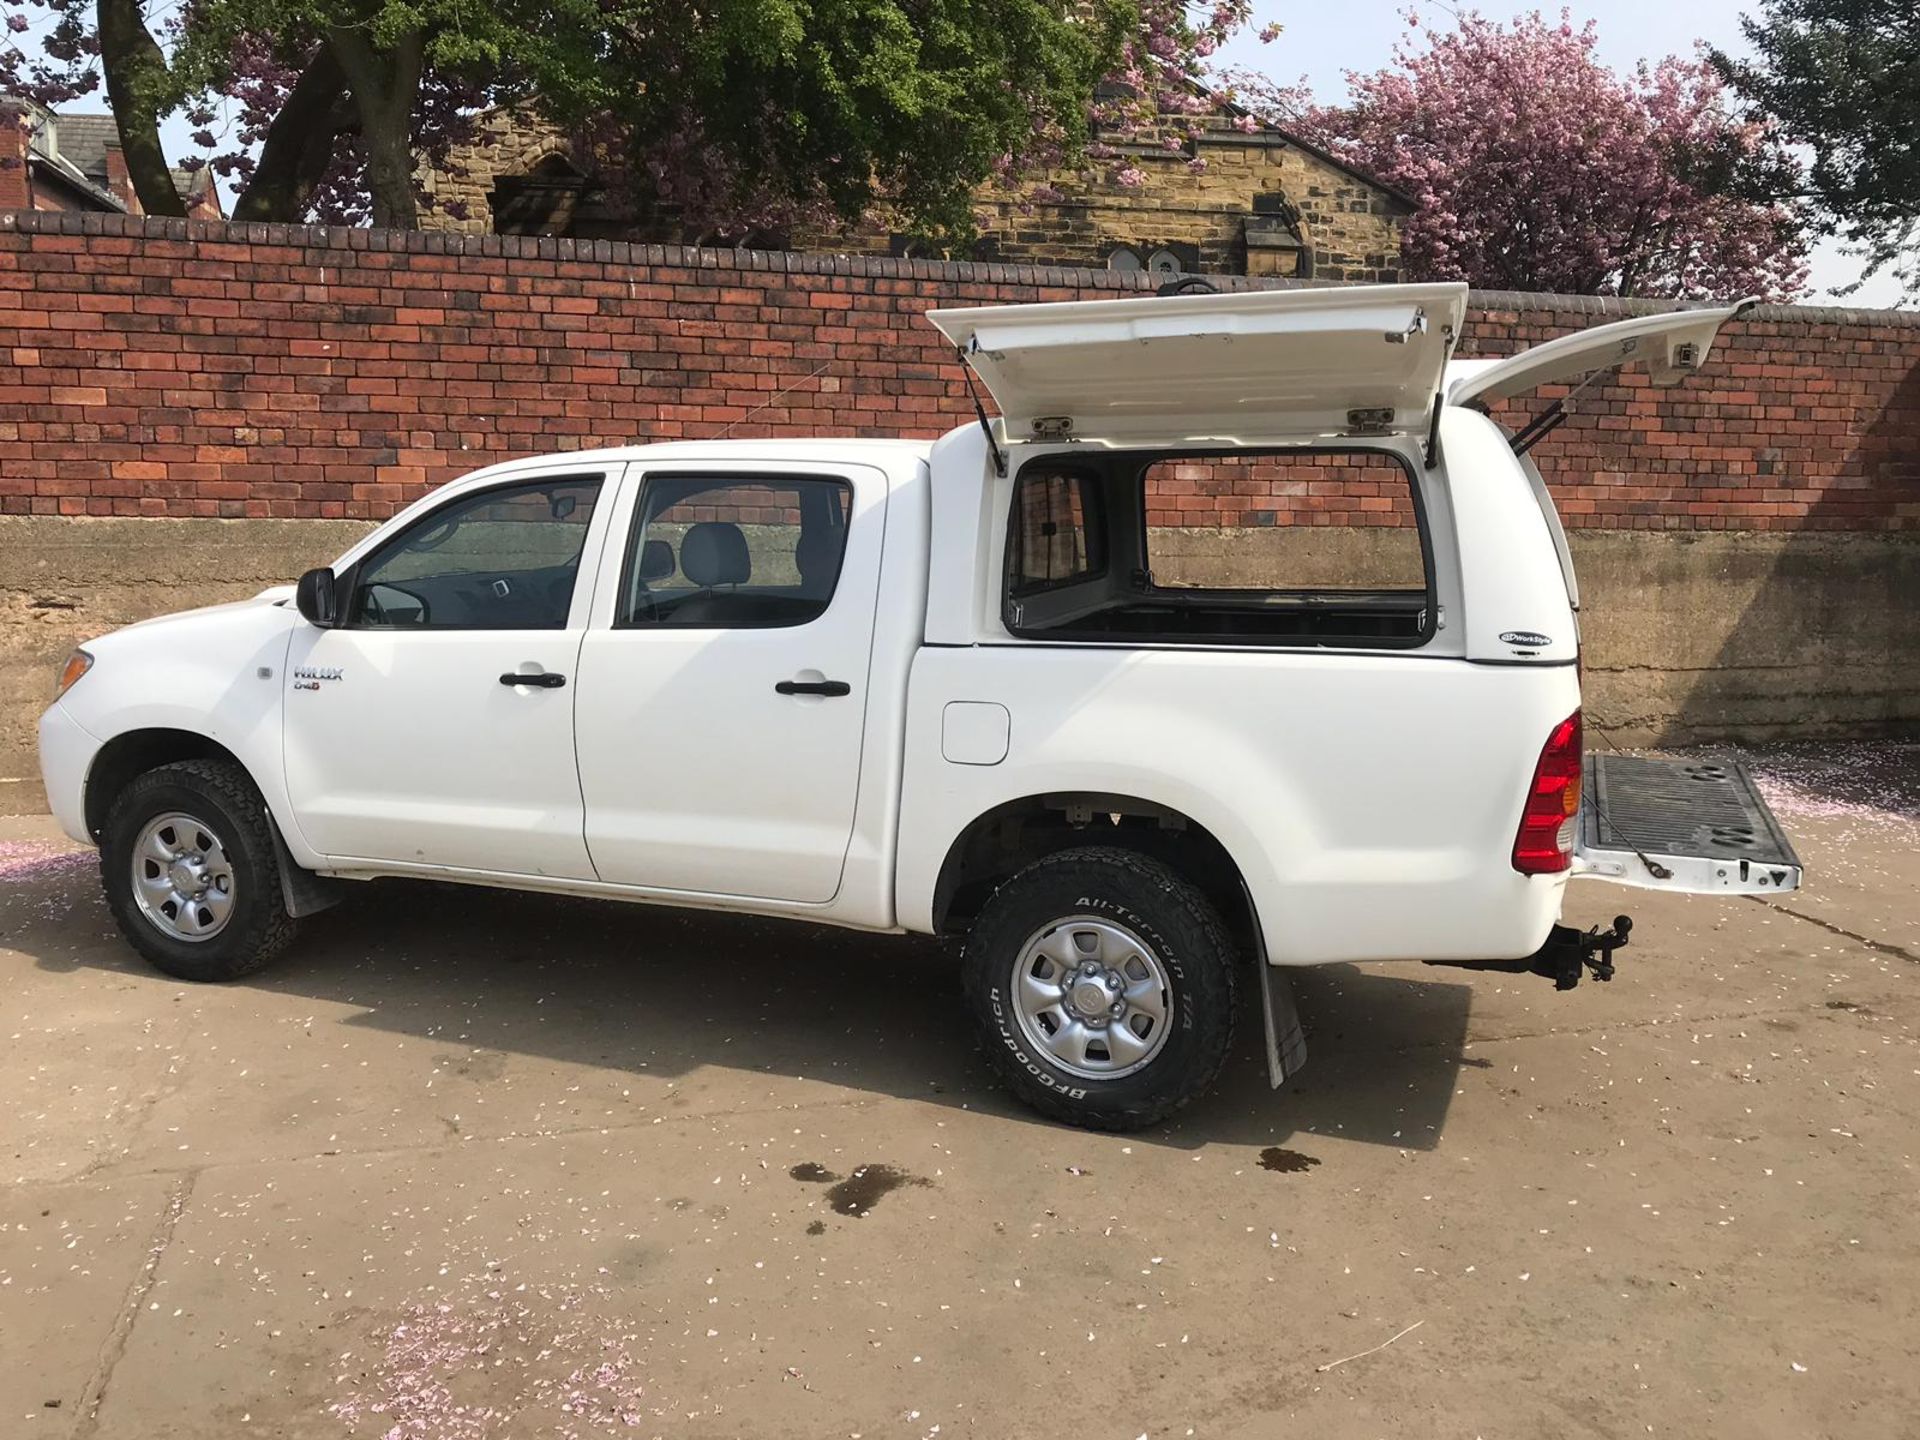 2008/58 REG TOYOTA HILUX HL2 D-4D 4X4 DOUBLE CAB PICK UP, SHOWING 0 FORMER KEEPERS *PLUS VAT* - Image 4 of 20